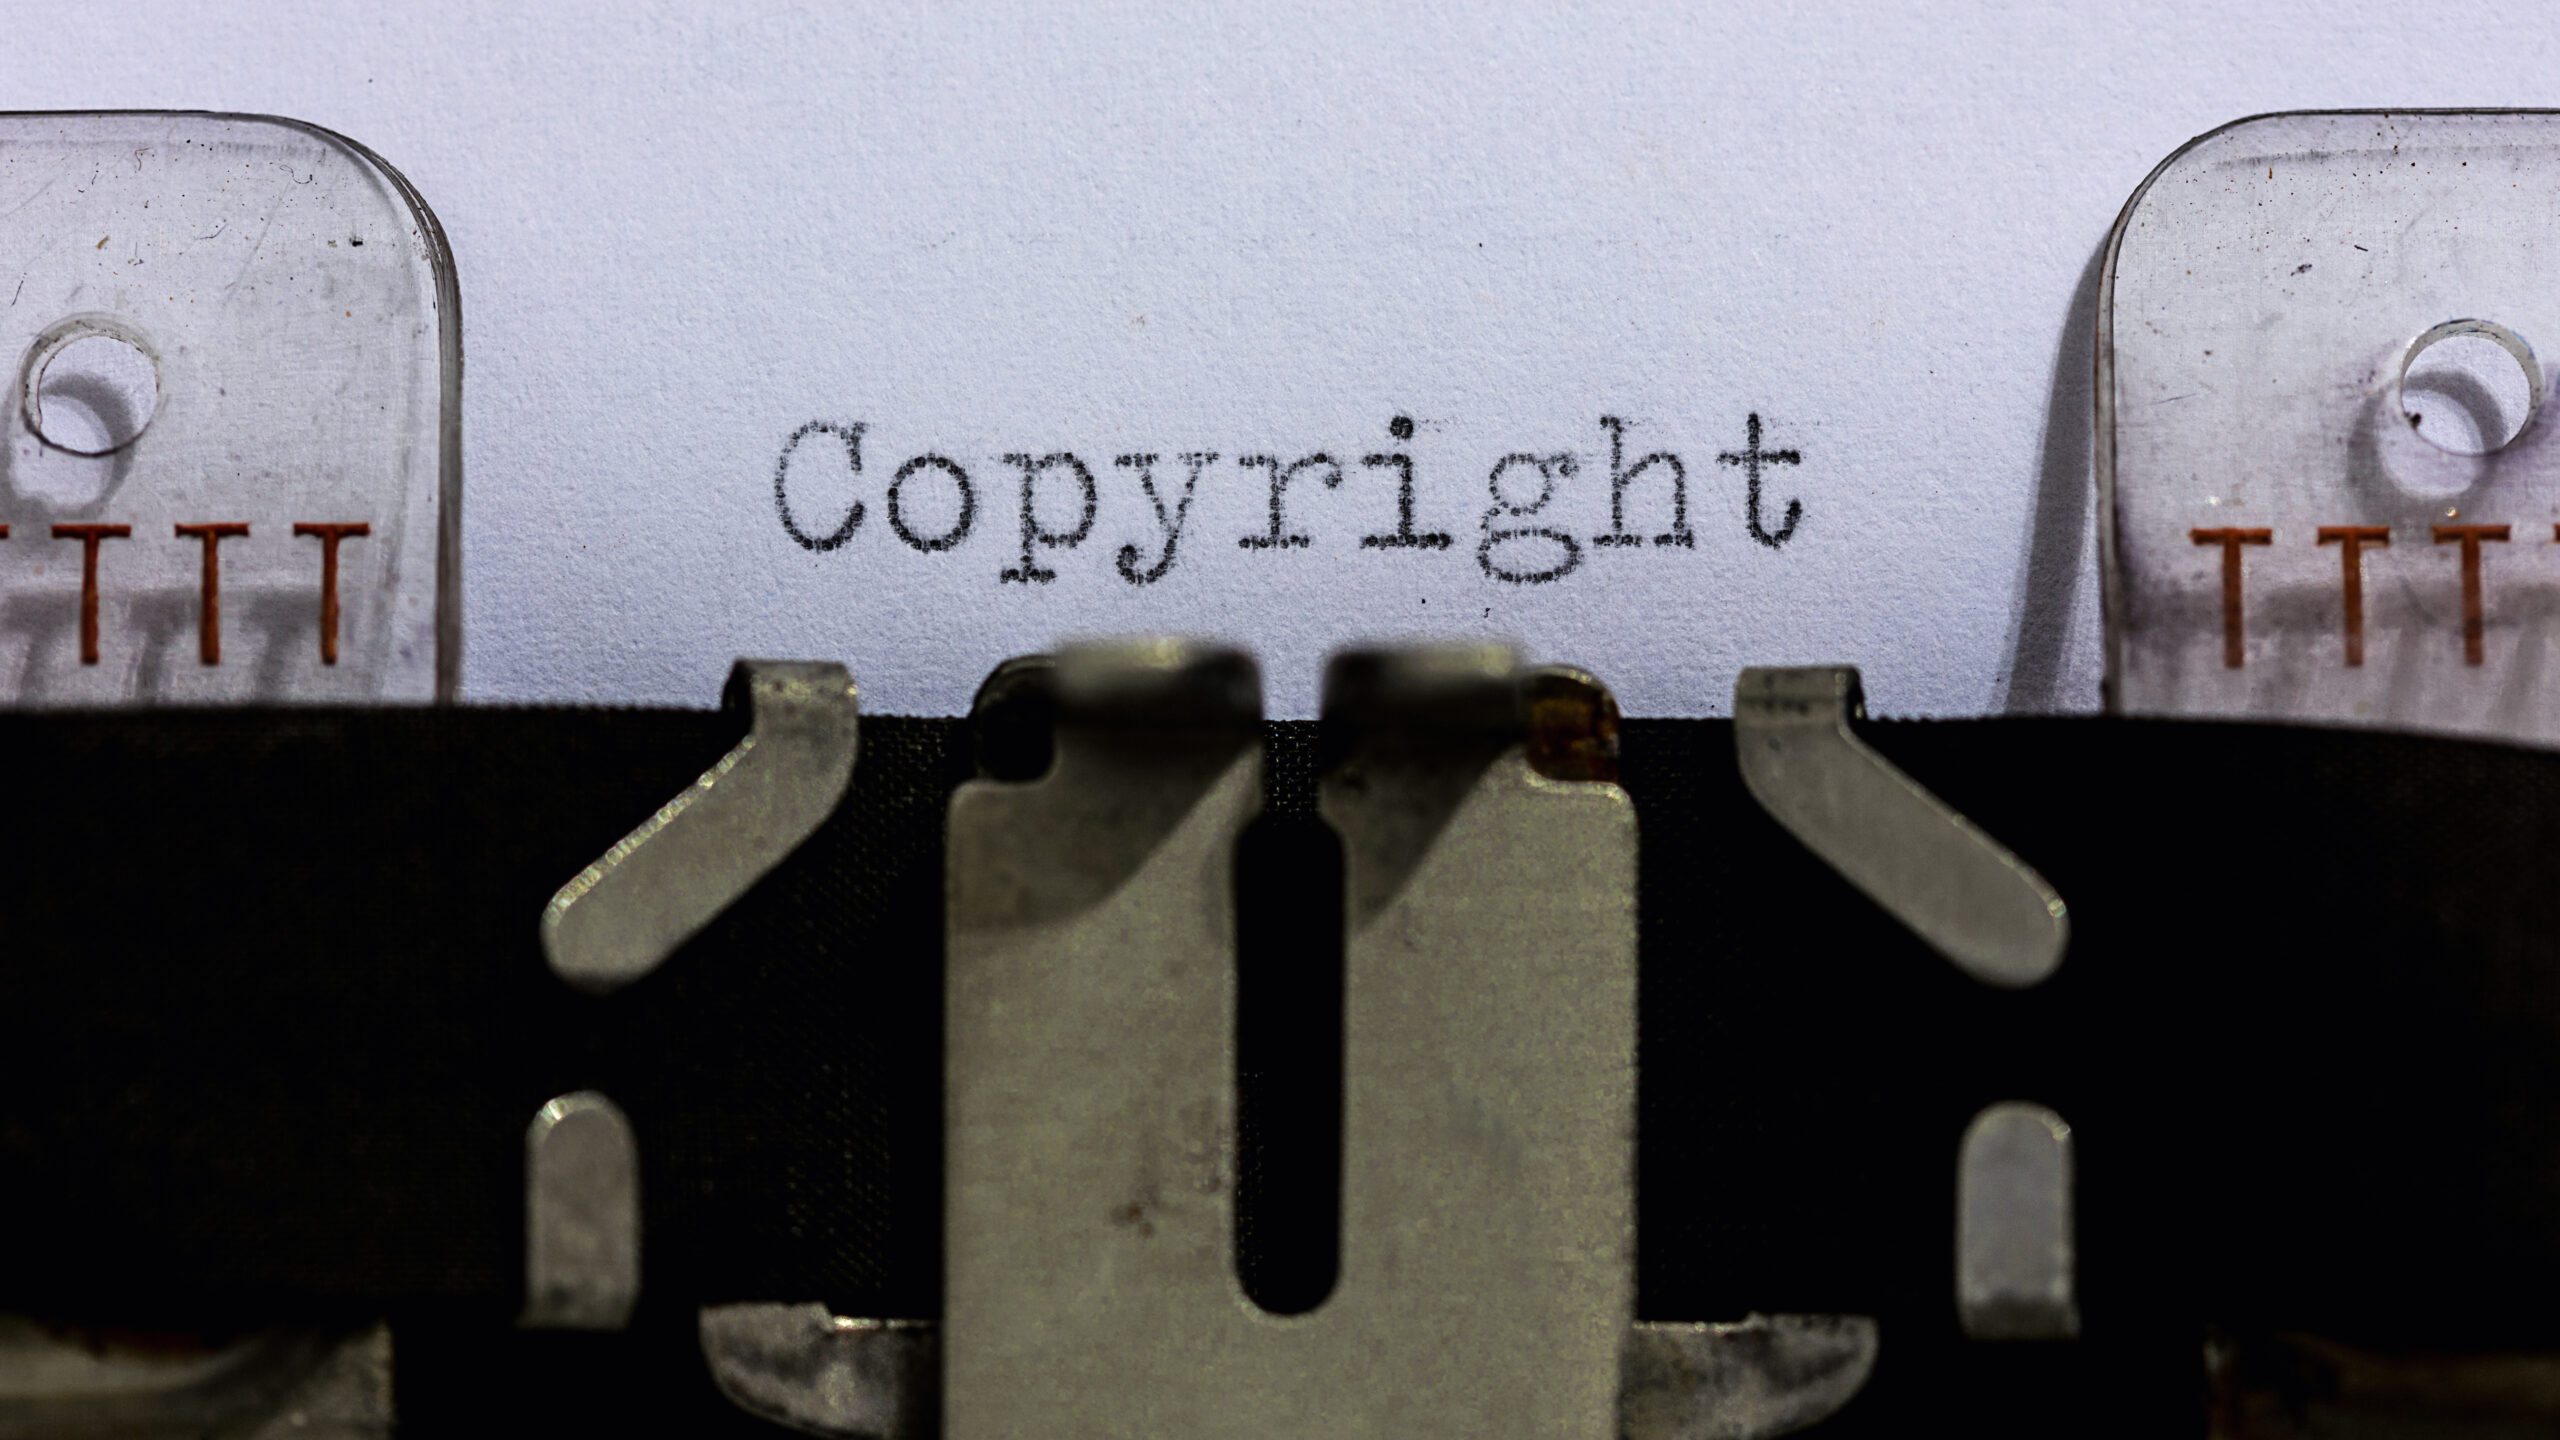 Exploring Copyright and Creative Commons